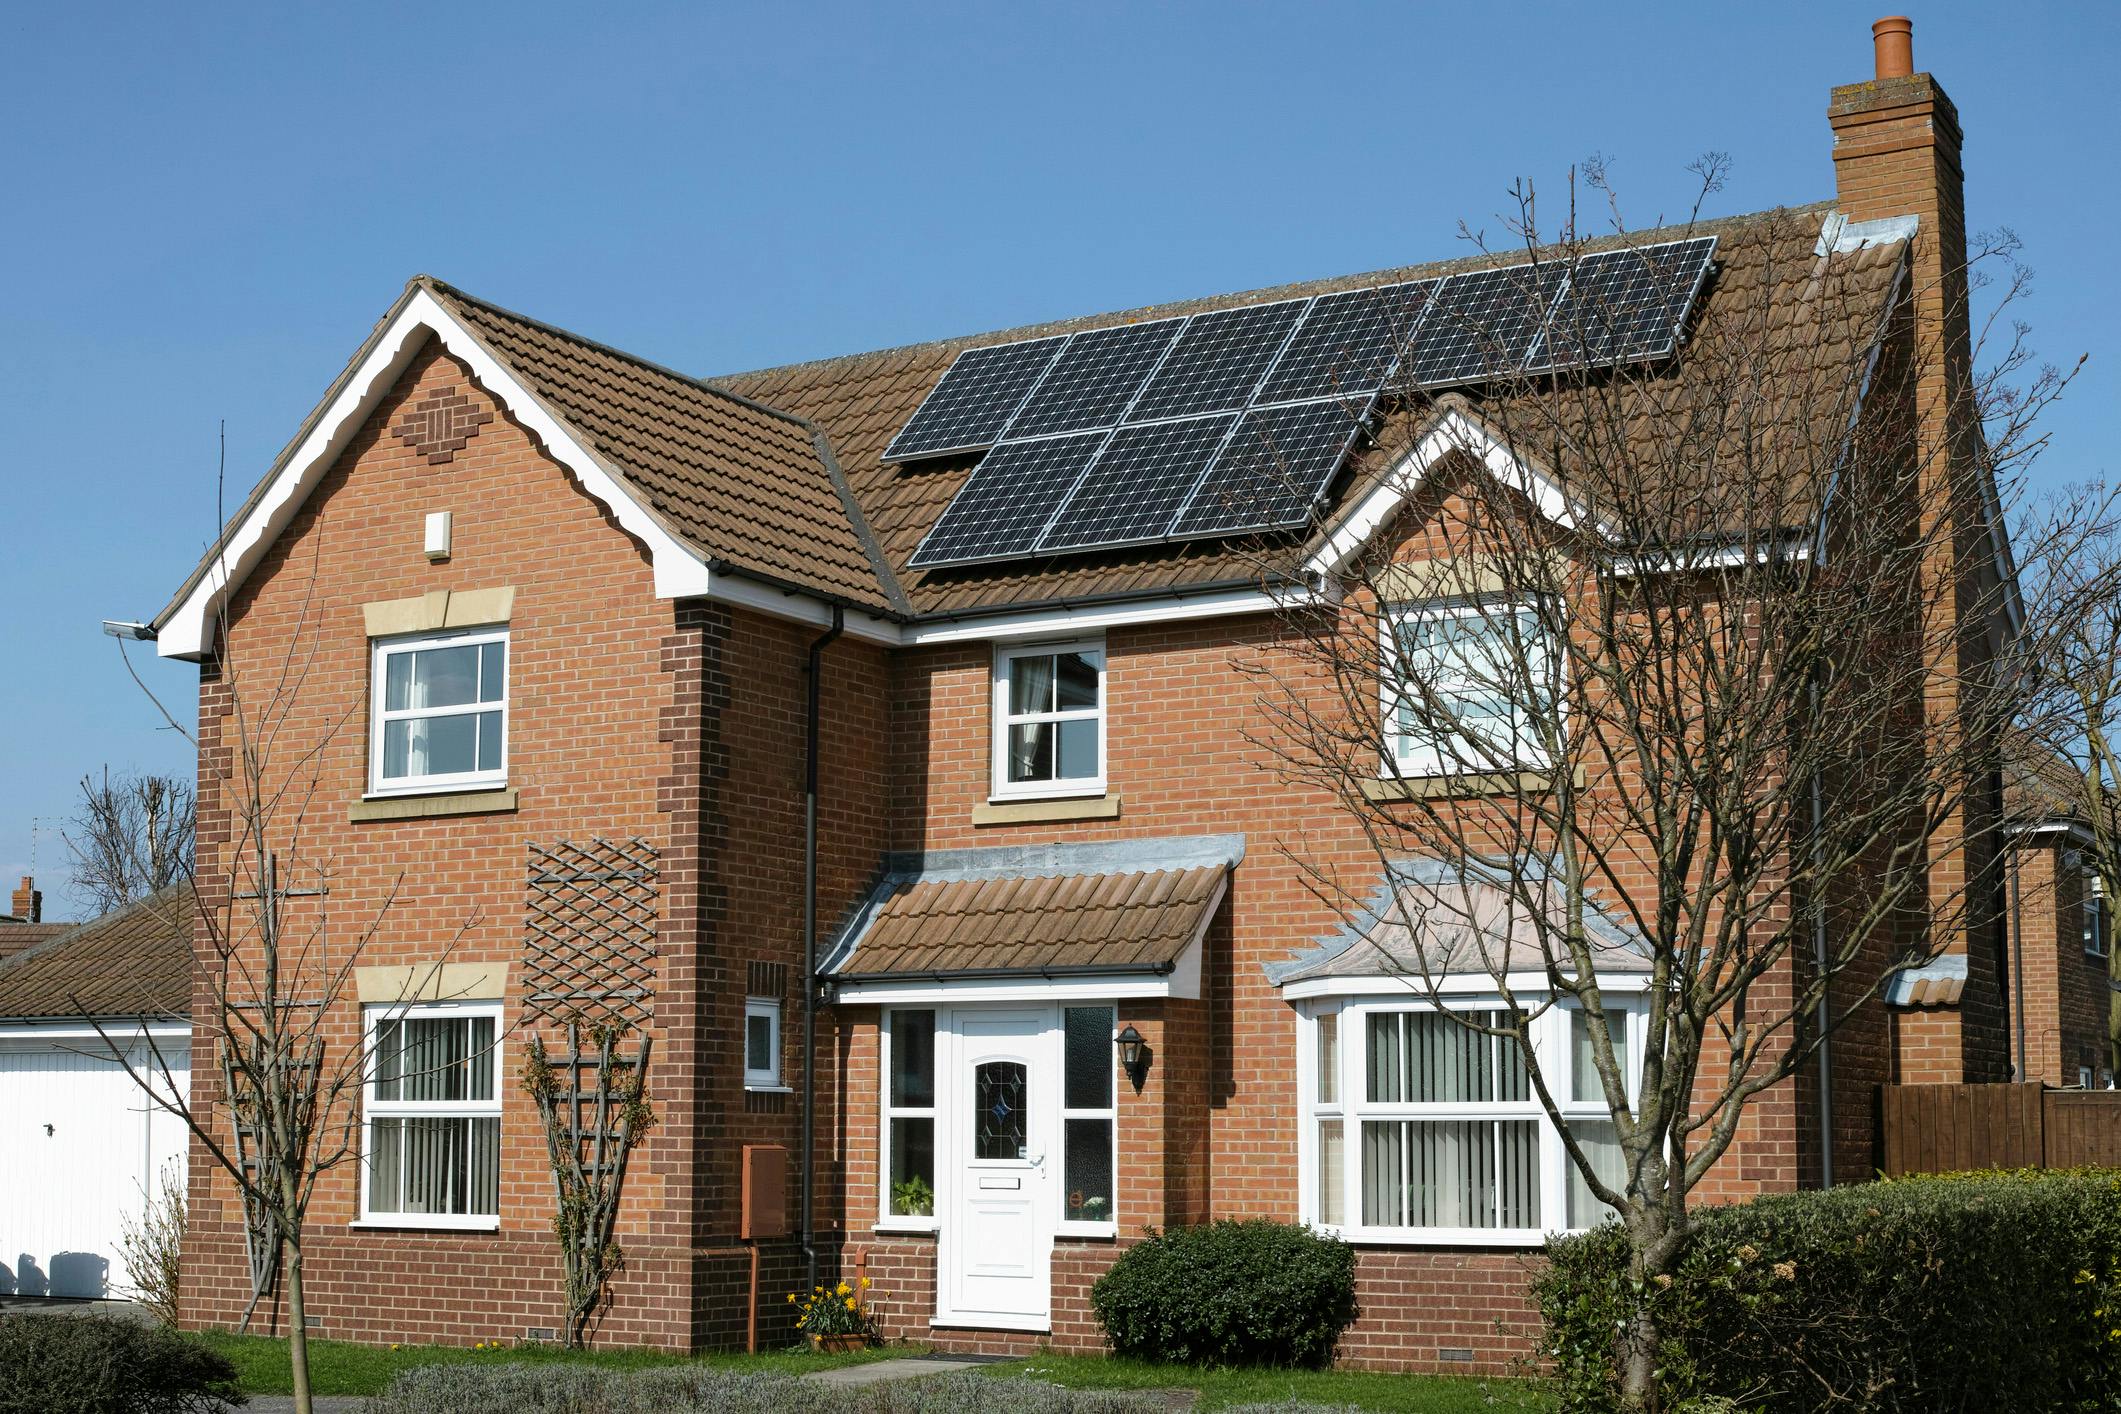 House with solar pv panels on roof